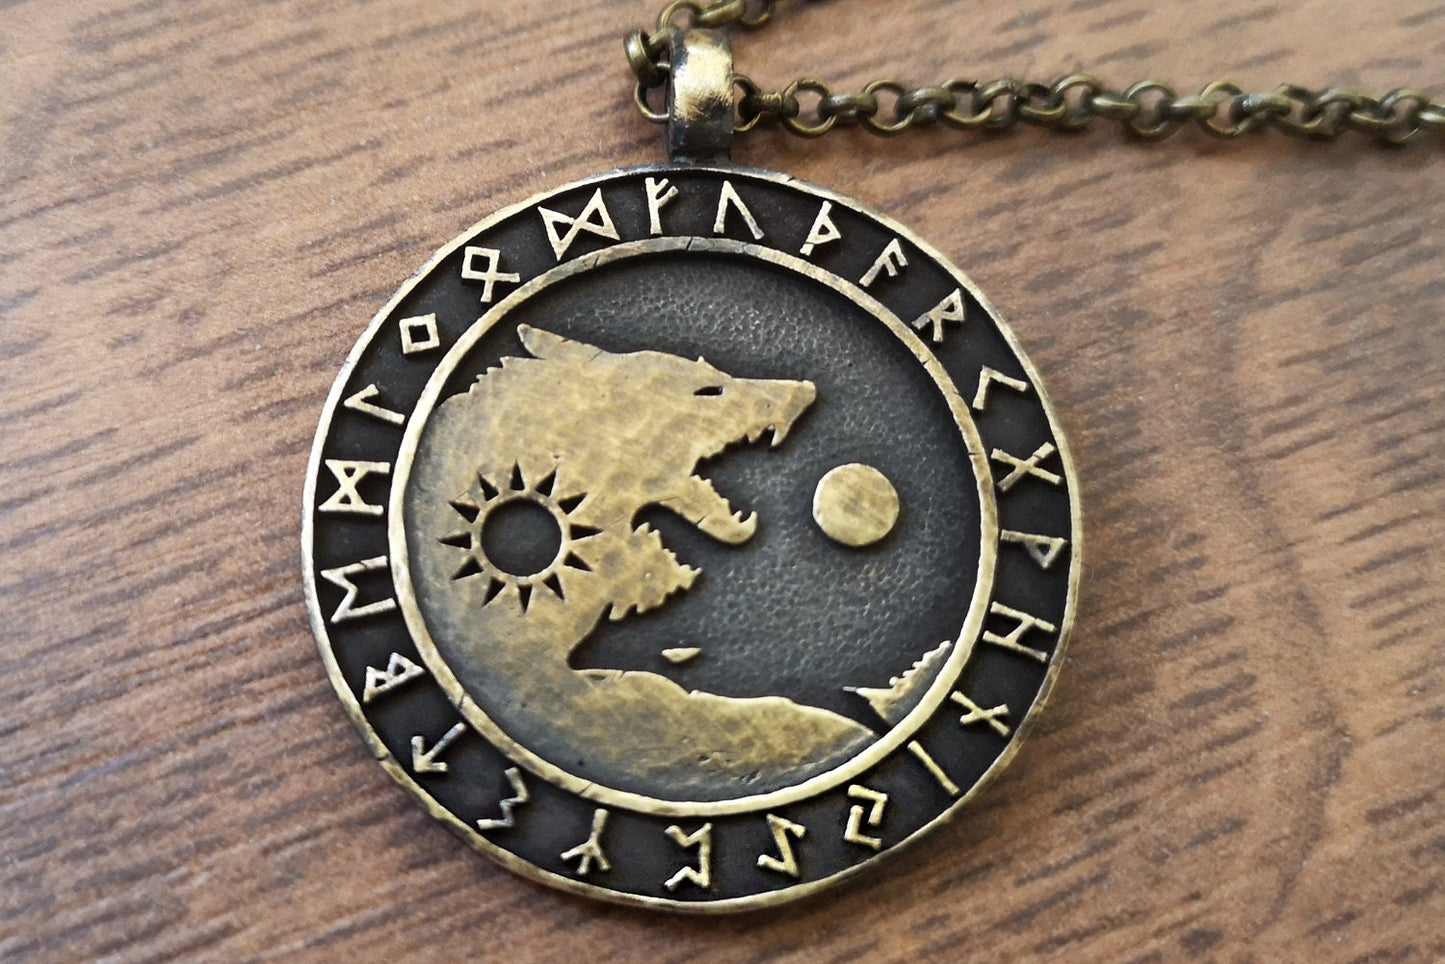 Celtic and Viking inspired Necklace with Wolves Skoll Hati Chasing Sun and Moon - Balance In Life, Friendship Best Friend Pendant